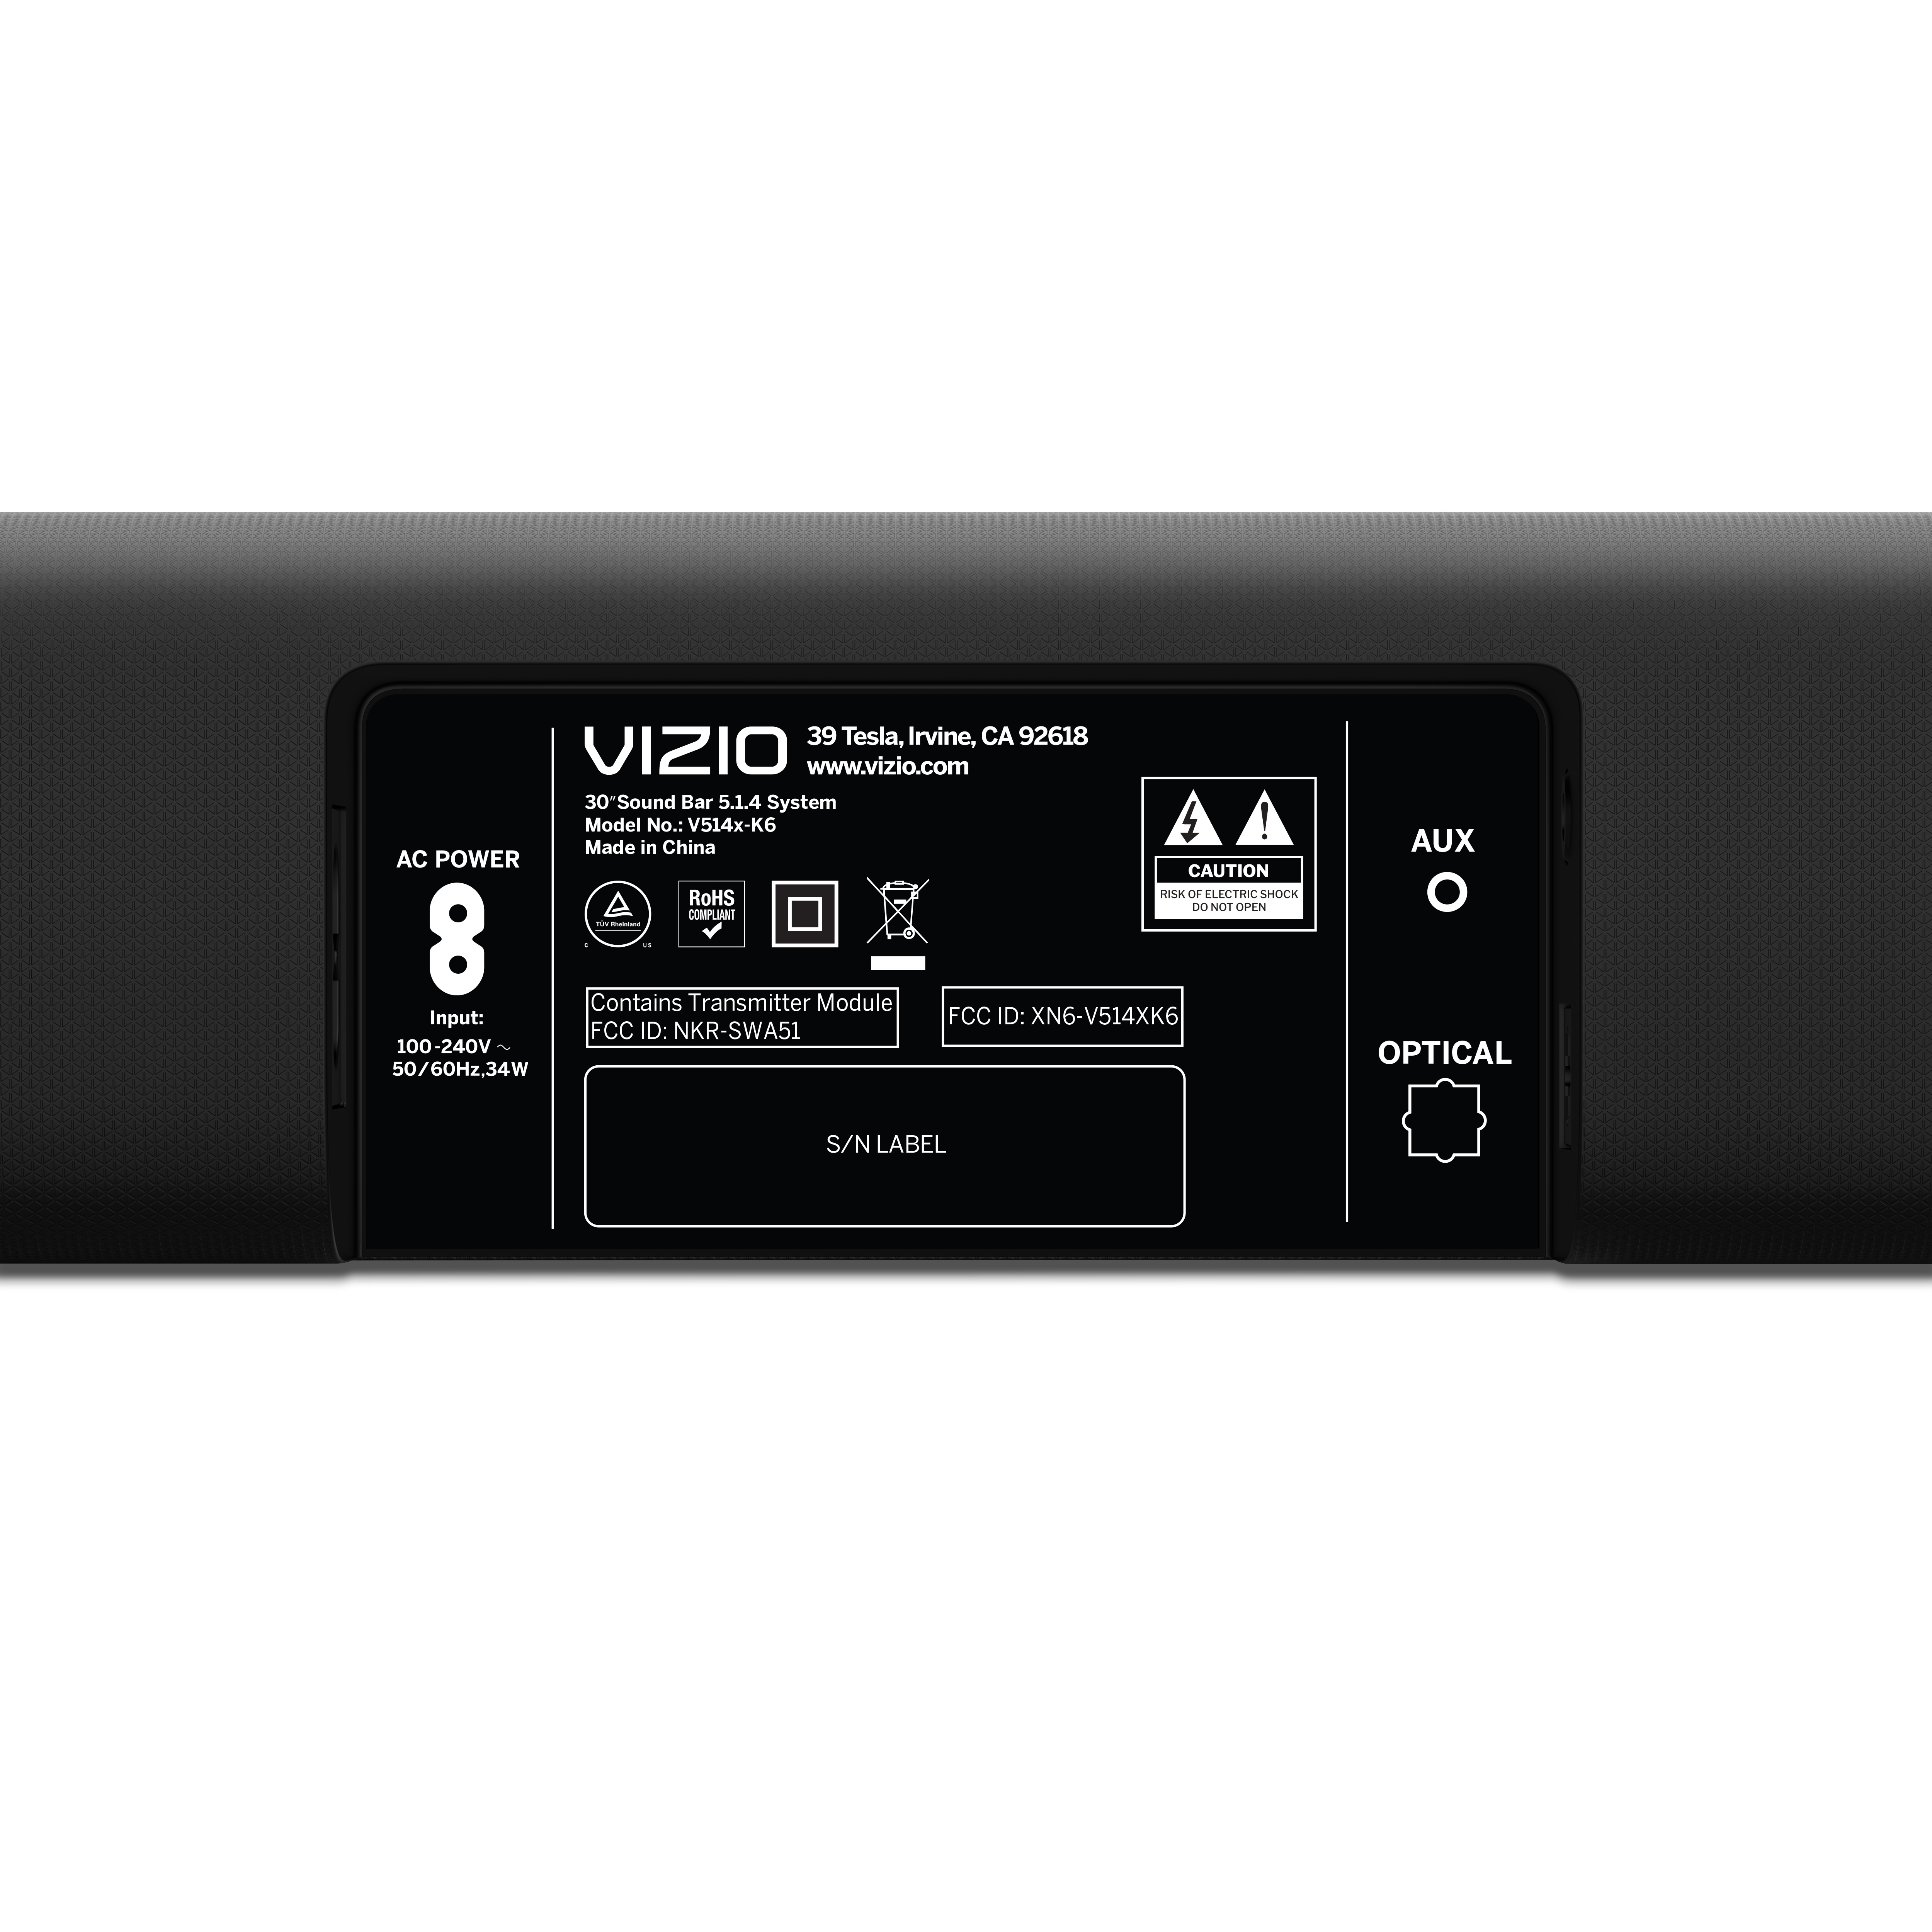 VIZIO V-Series 5.1 Home Theater Sound Bar with DTS Virtual:X, Bluetooth,  Optical Connection V514x-K6